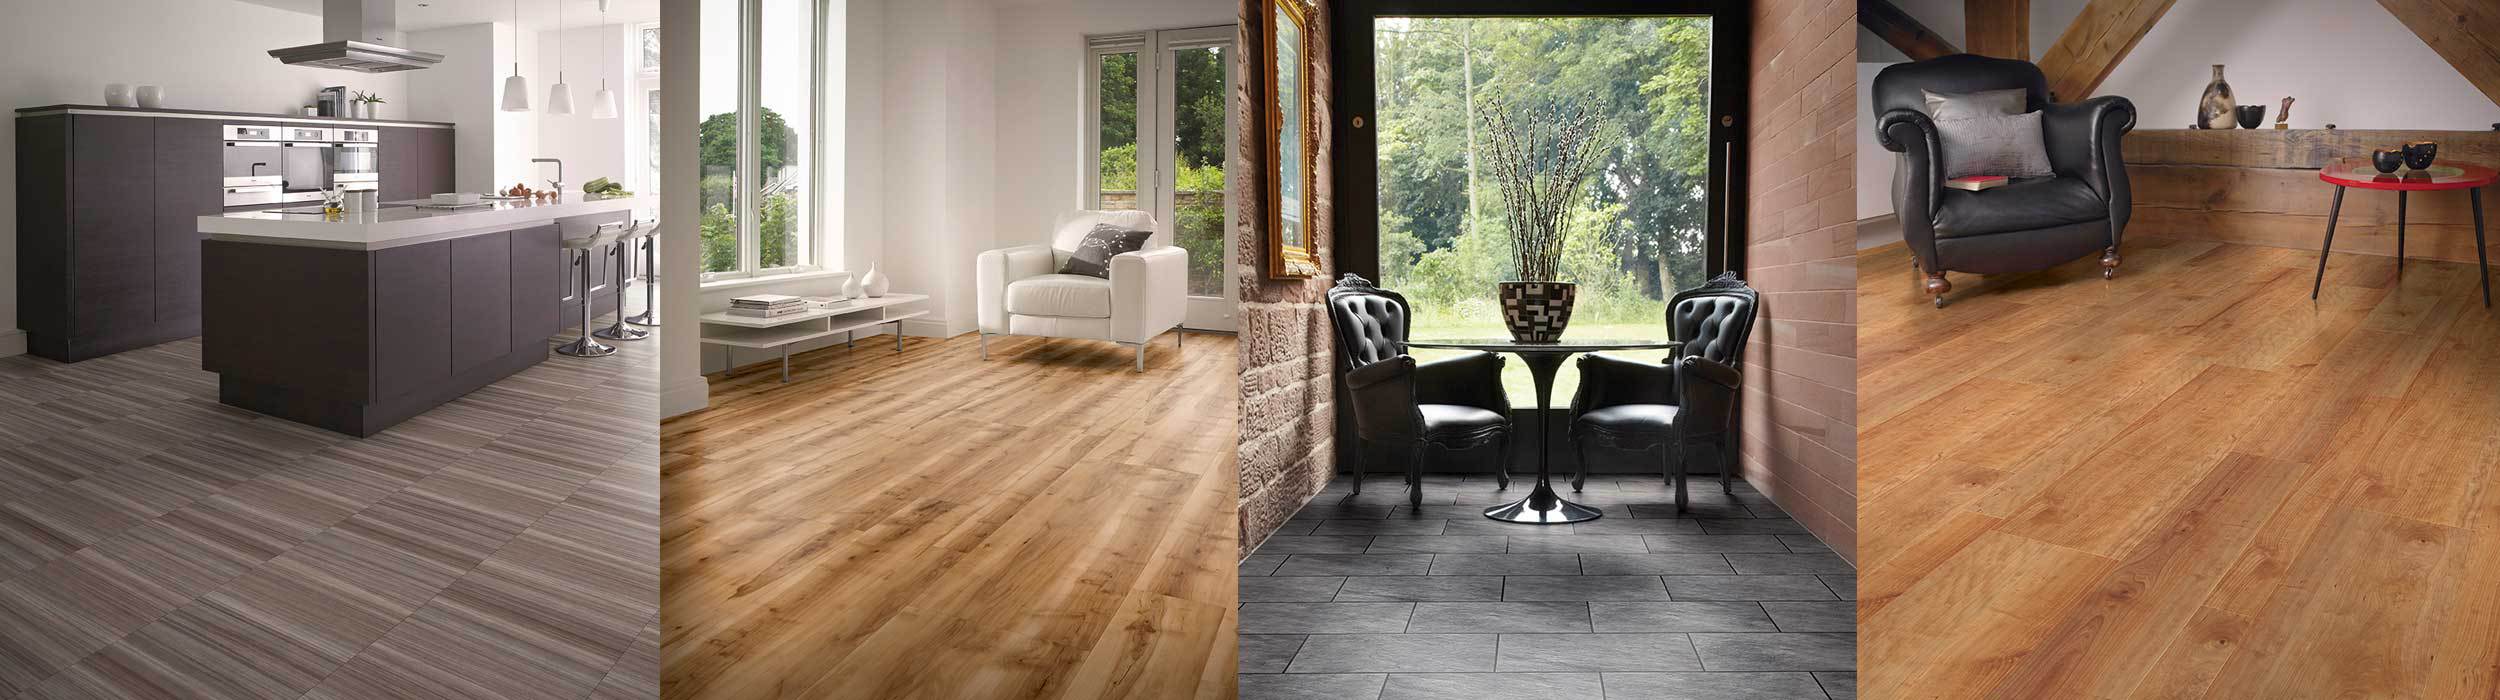 Professional wooden flooring techniques in Clitheroe